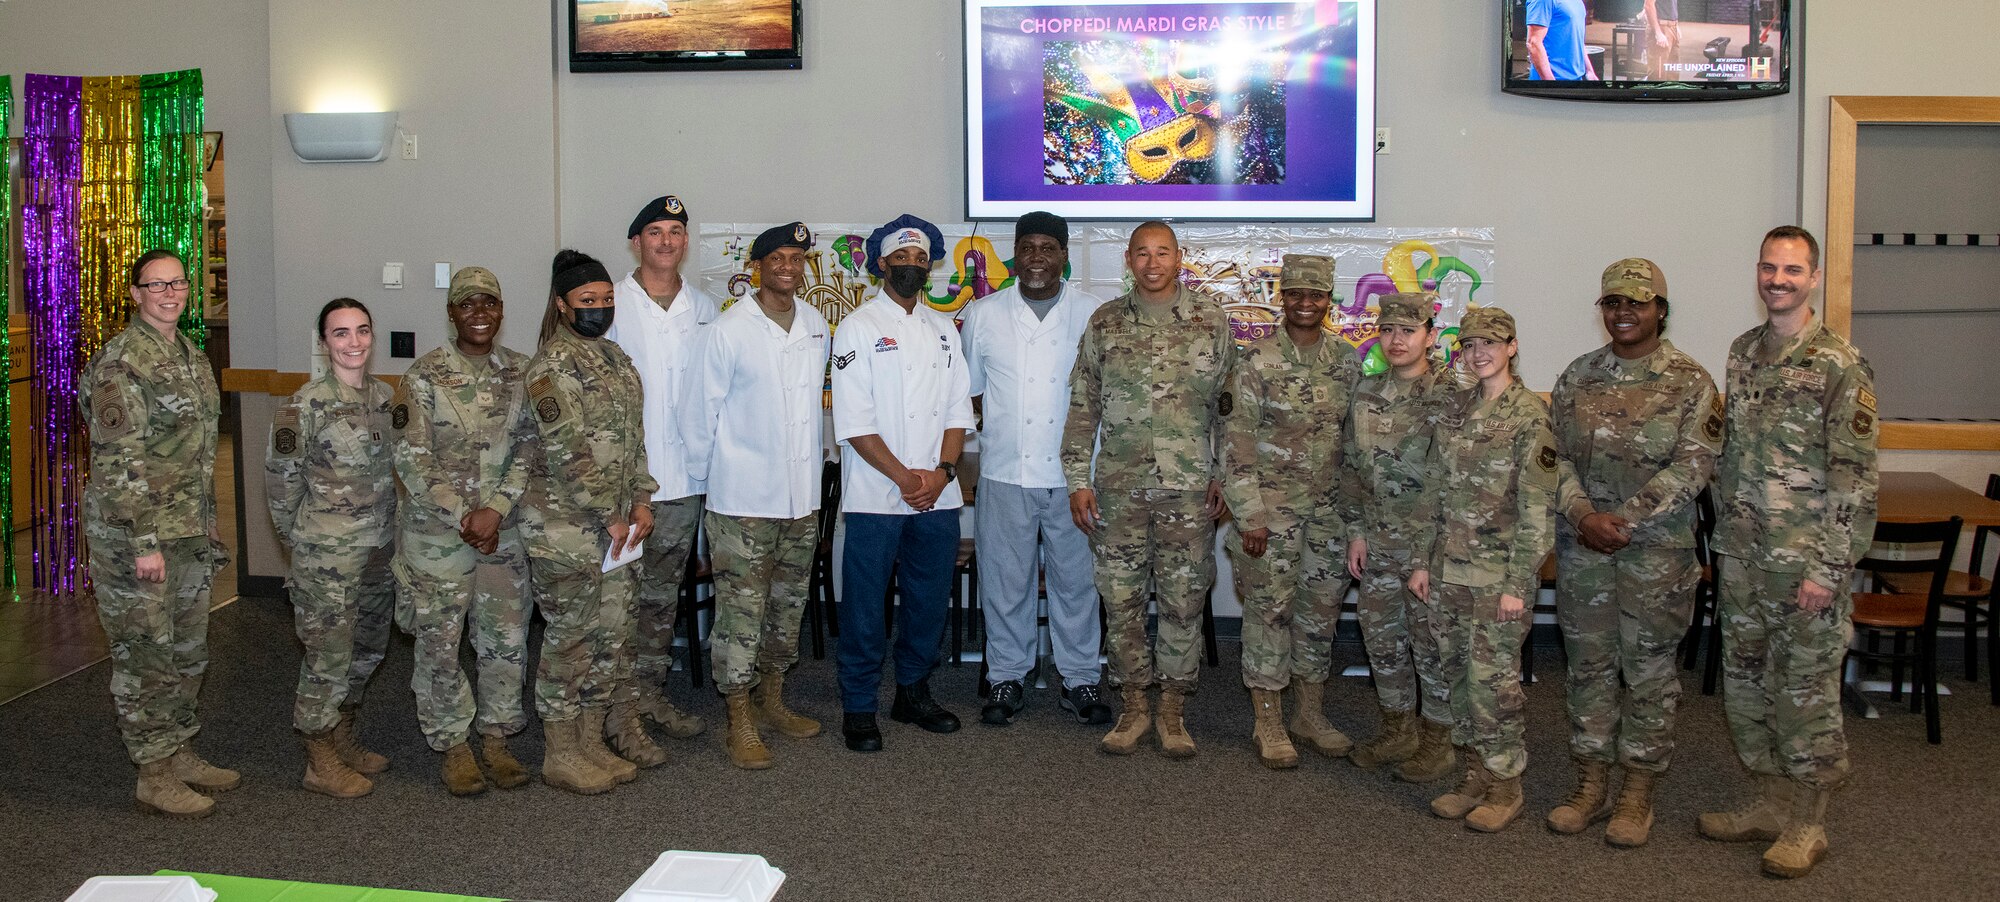 U.S. Airmen assigned to the 60th Mission Support Group participate in a Mardi Gras themed chopped competition at Travis Air Force Base, California, March 23, 2022. The 60th Mission Support Group Monarch Dining Facility hosted a cooking competition showcasing skill, speed and ingenuity. Teams of four competed to transform mystery ingredients into the main course and dessert dishes to present to a panel of judges. (U.S. Air Force photo by Heide Couch)